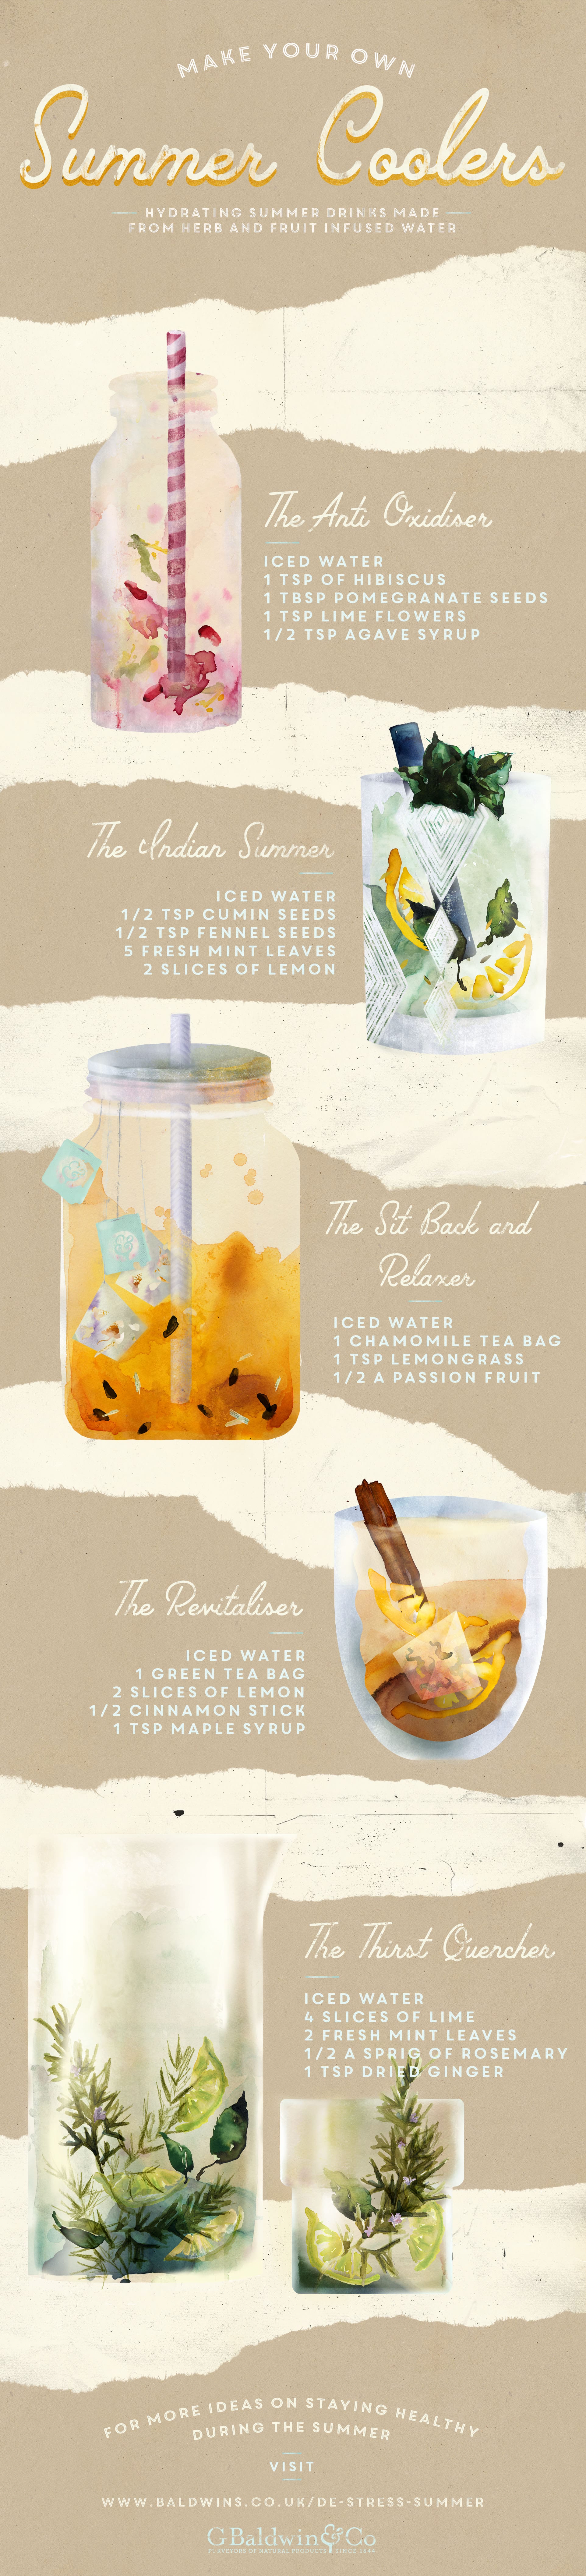 Summer Coolers - Infused Water Recipes - De-Stress Summer